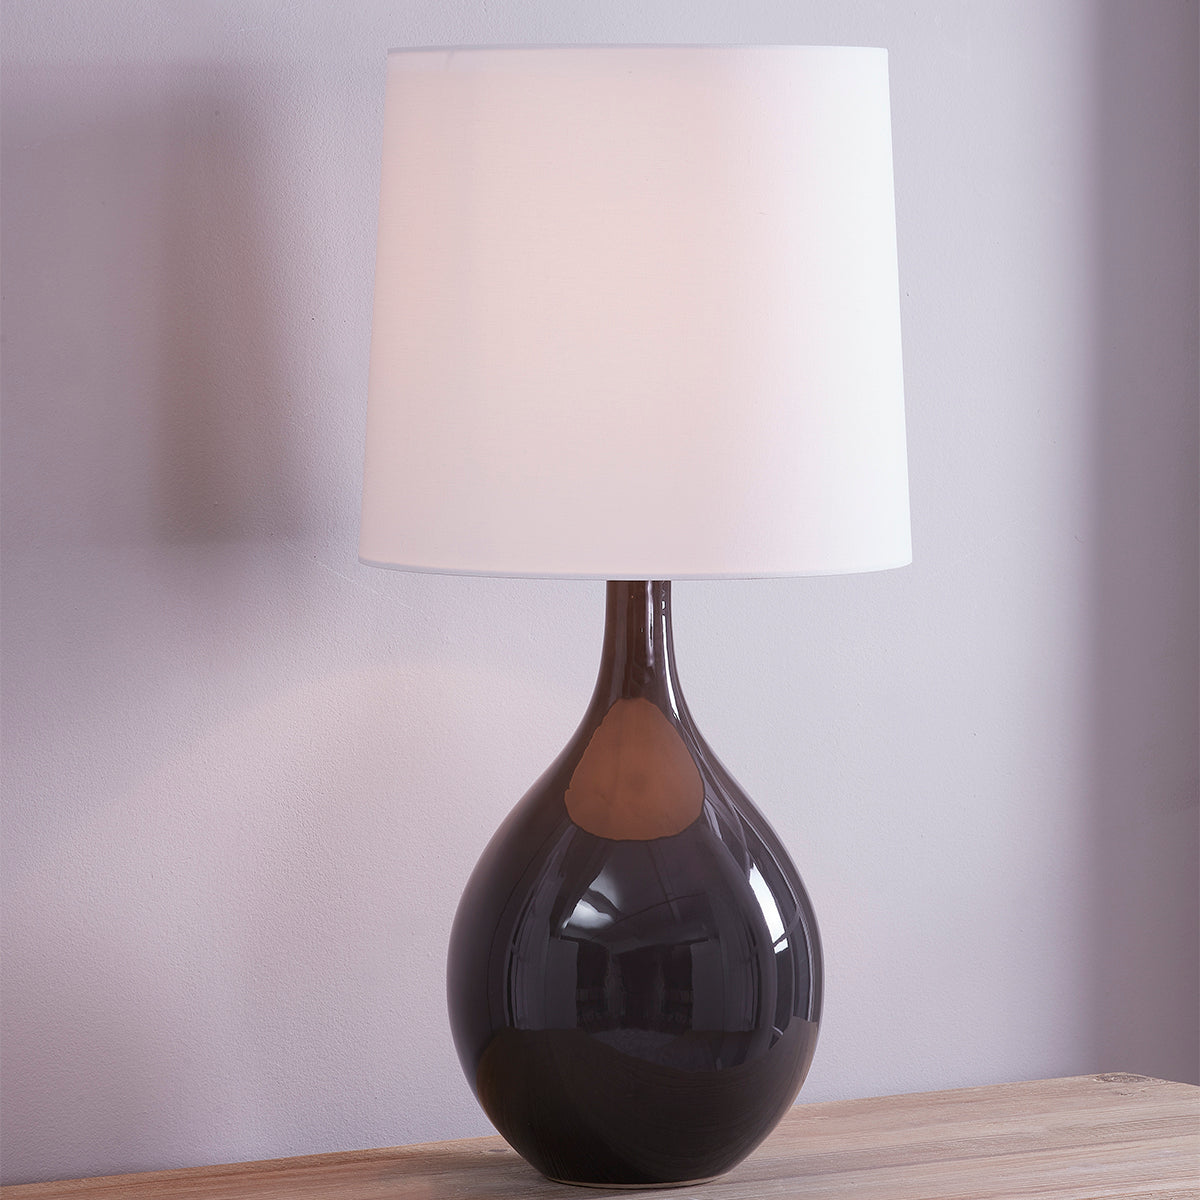 Soft Grey Ceramic Gloss Mink Base with White Belgian Linen Shade Table Lamp